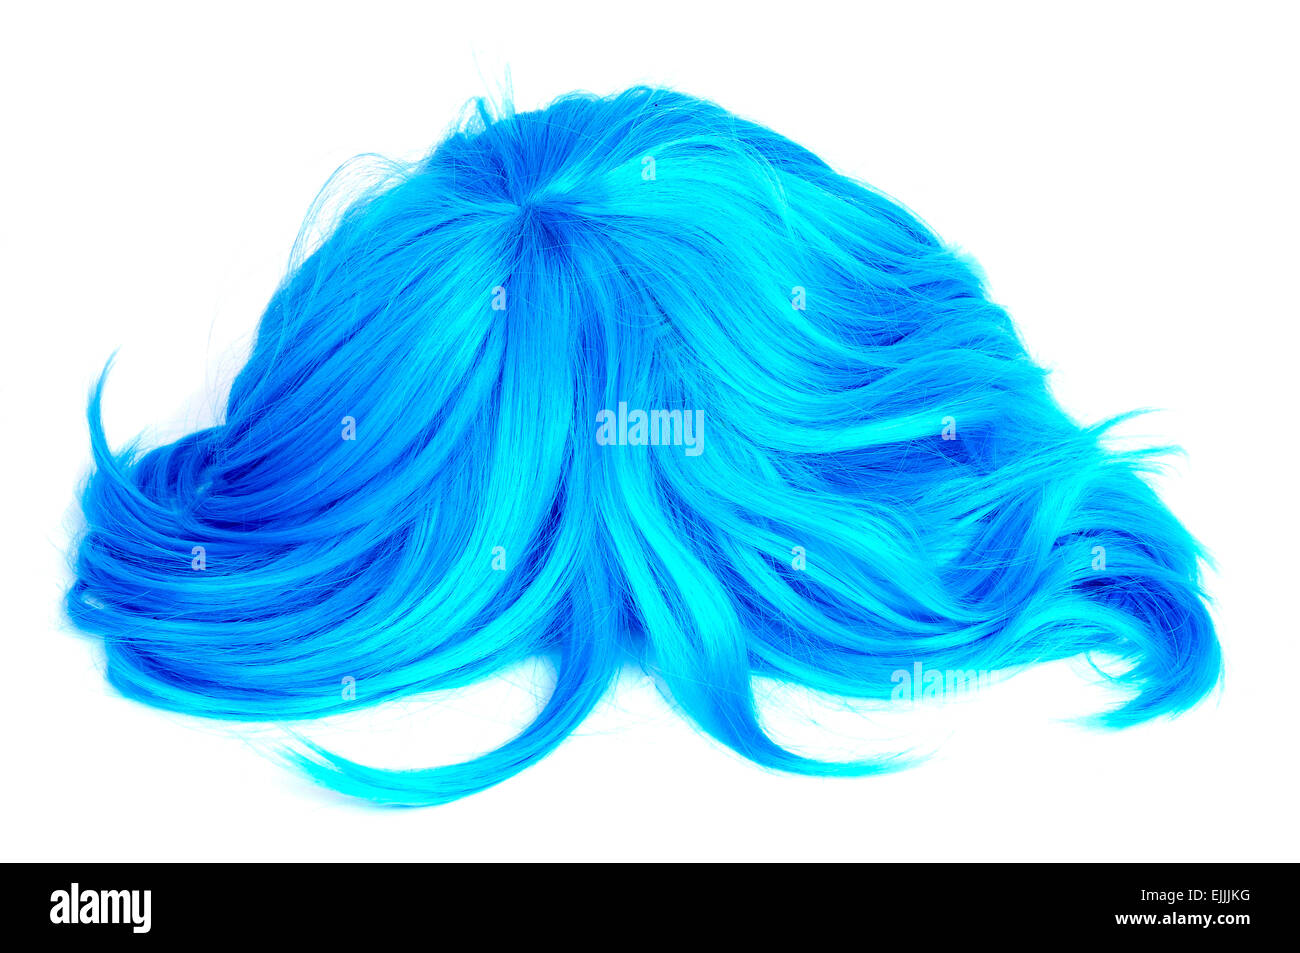 a long-haired blue wig on a white background Stock Photo